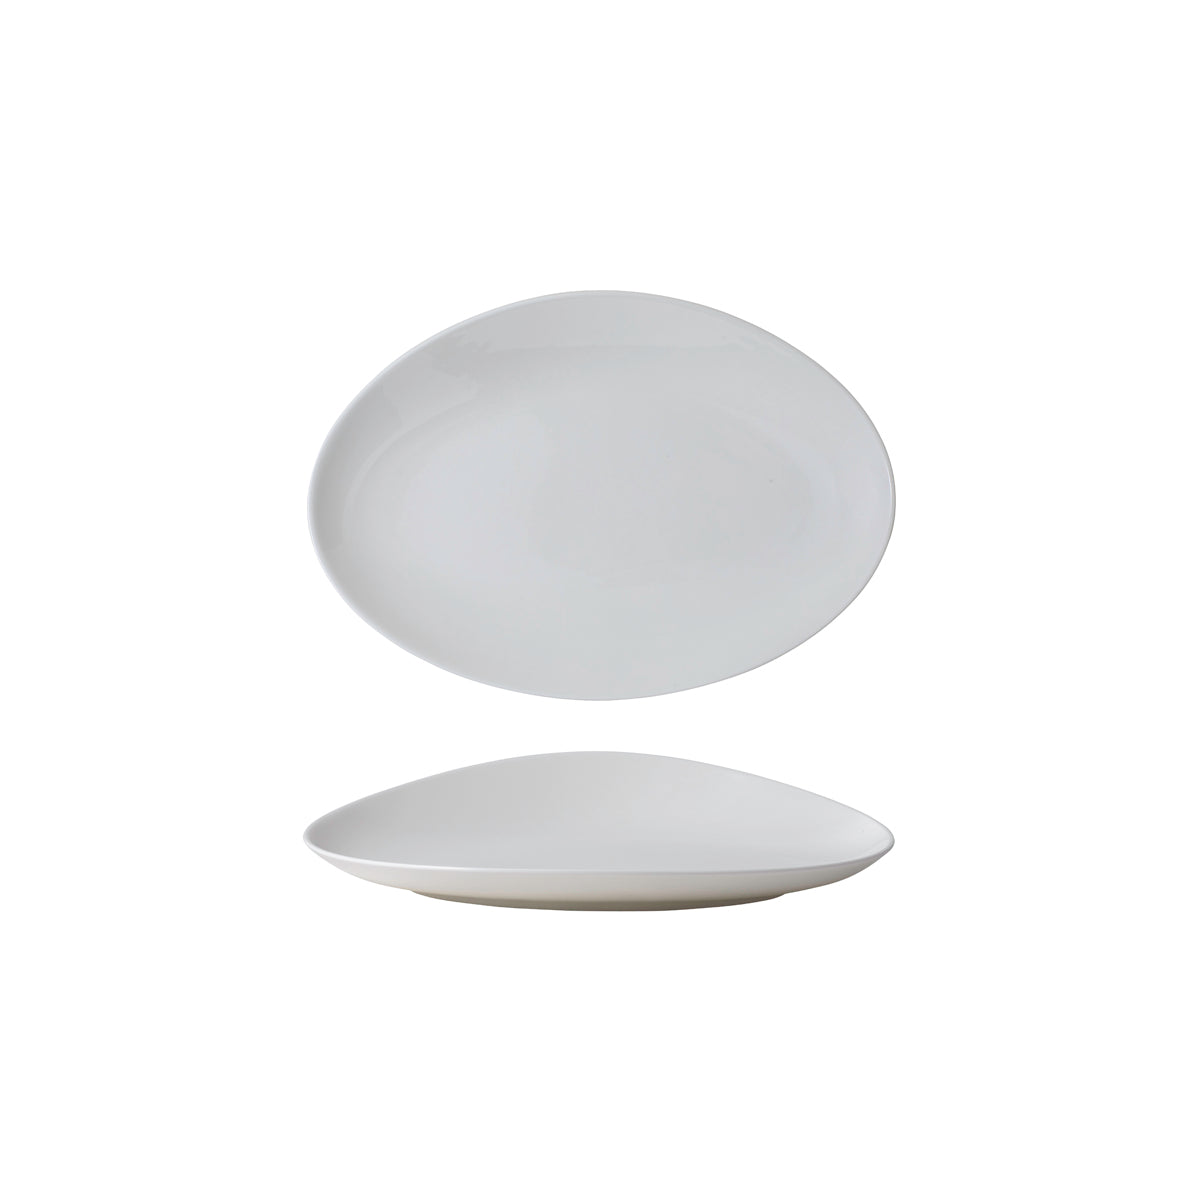 VB16-4090-2765 Villeroy And Boch Villeroy And Boch Stella Cosmo White Oval Coupe Plate 300x200x50mm Tomkin Australia Hospitality Supplies